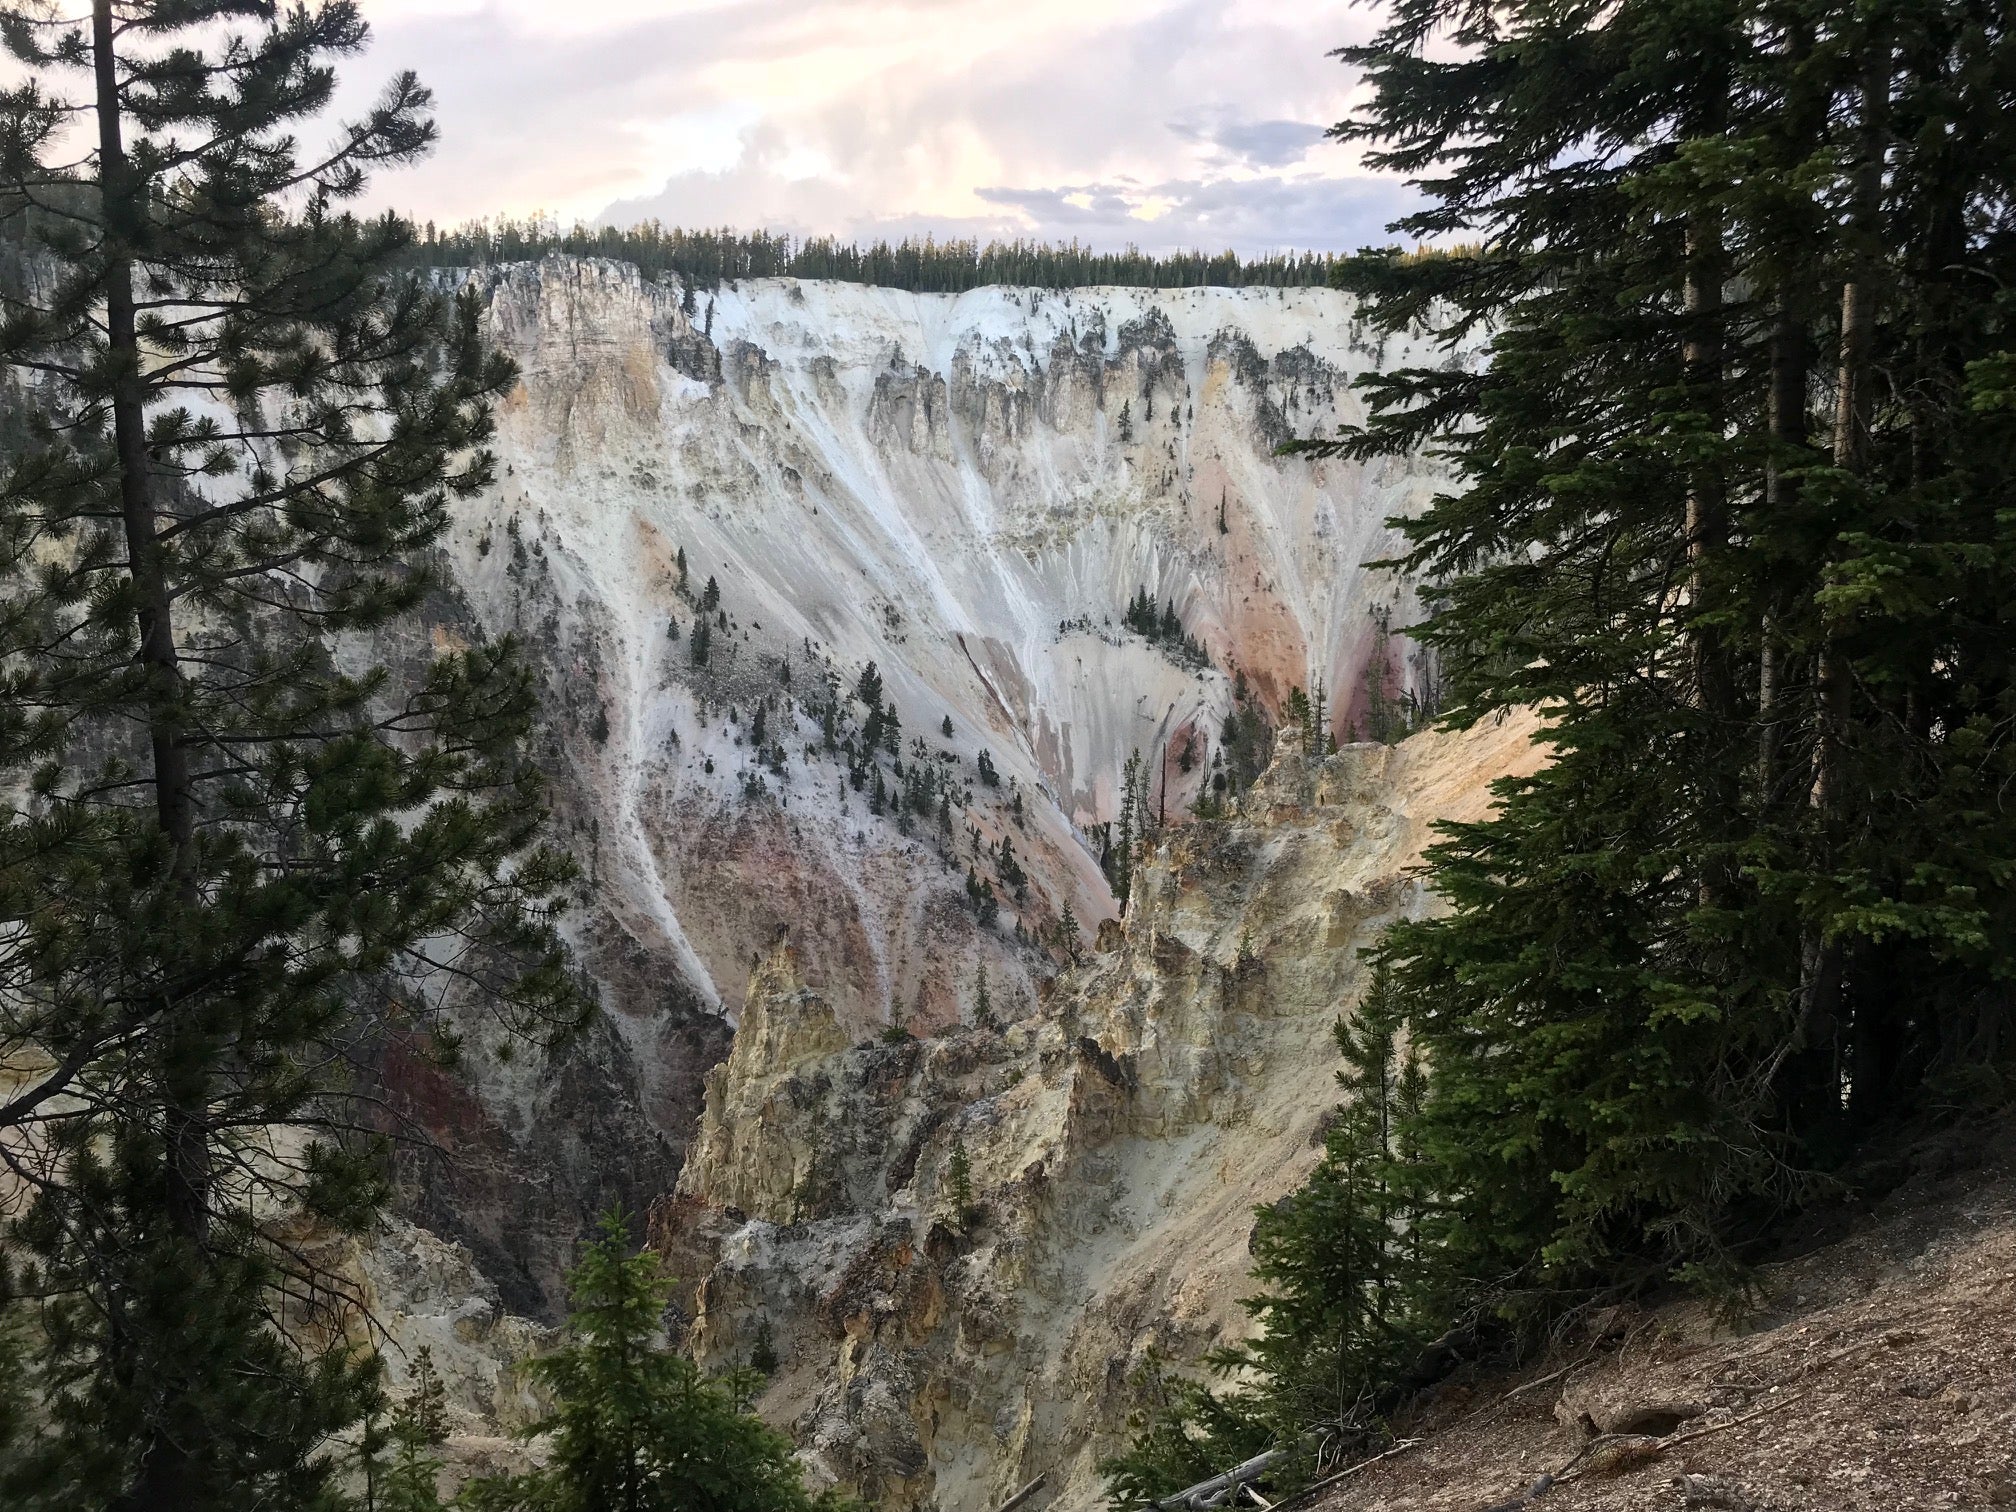 Pretty colors of the canyon at dusk. If you want to skip crowds at the major sites in Yellowstone, hit the major ones either early in the morning or late in the day.